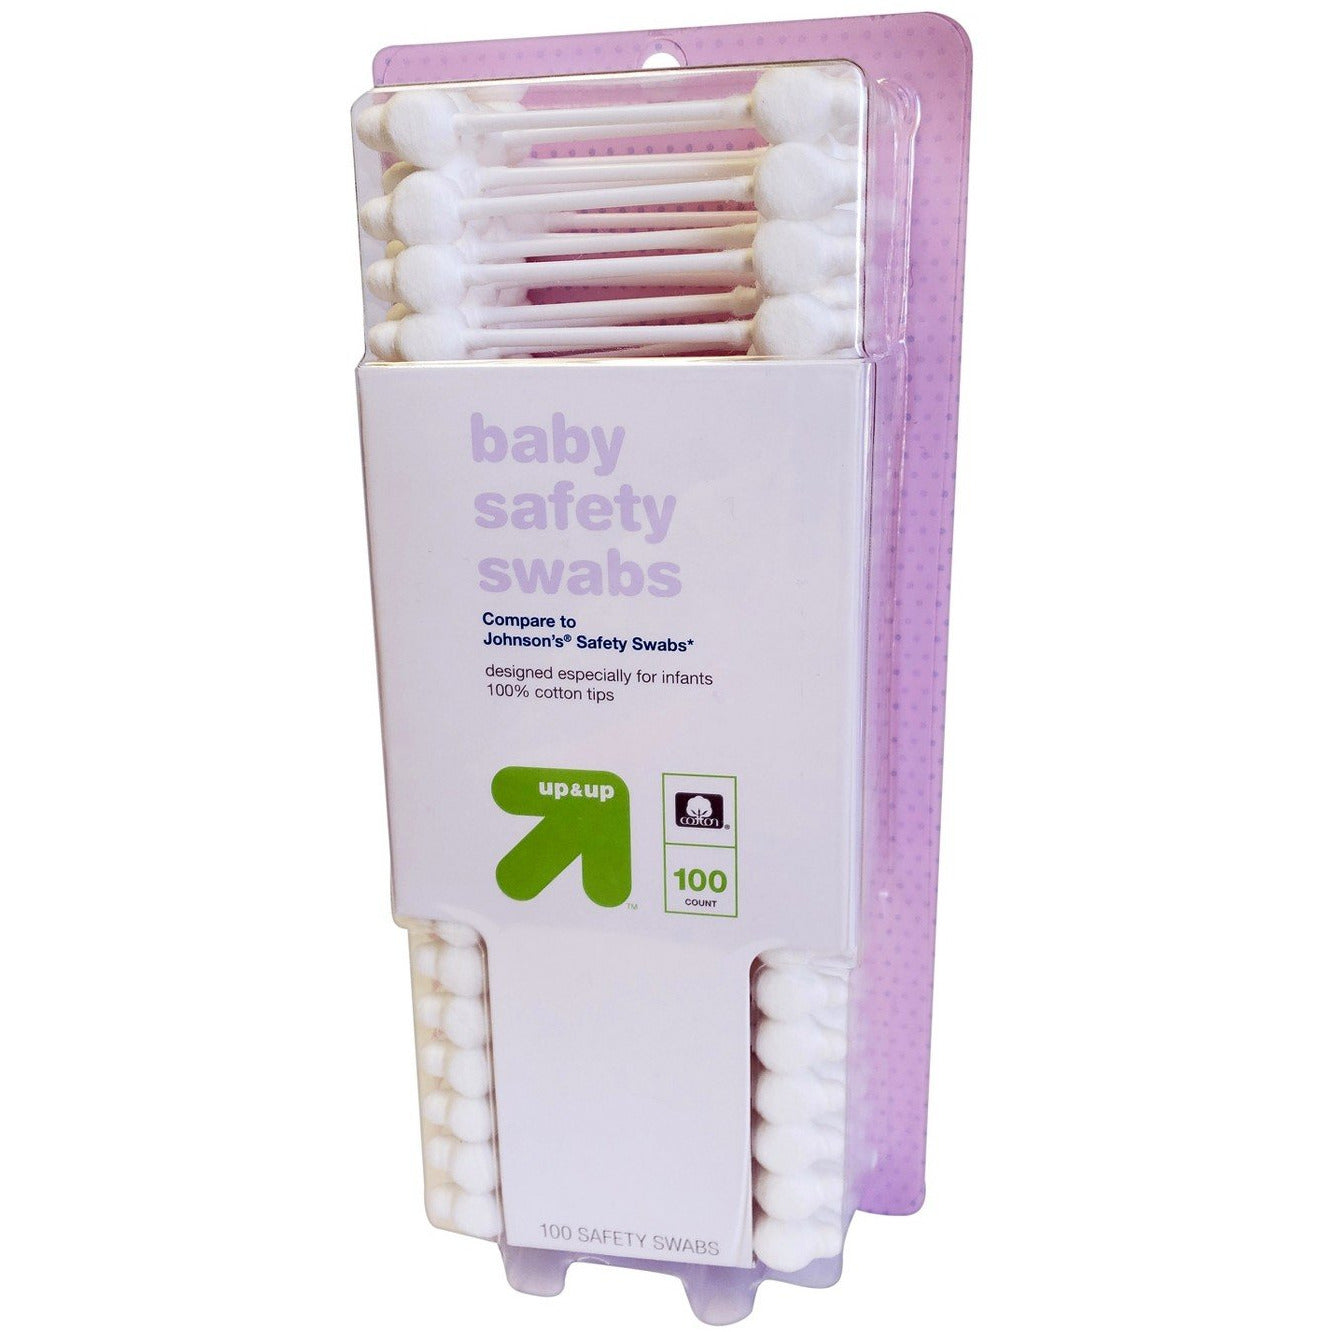 Up&Up Baby Safety Swabs